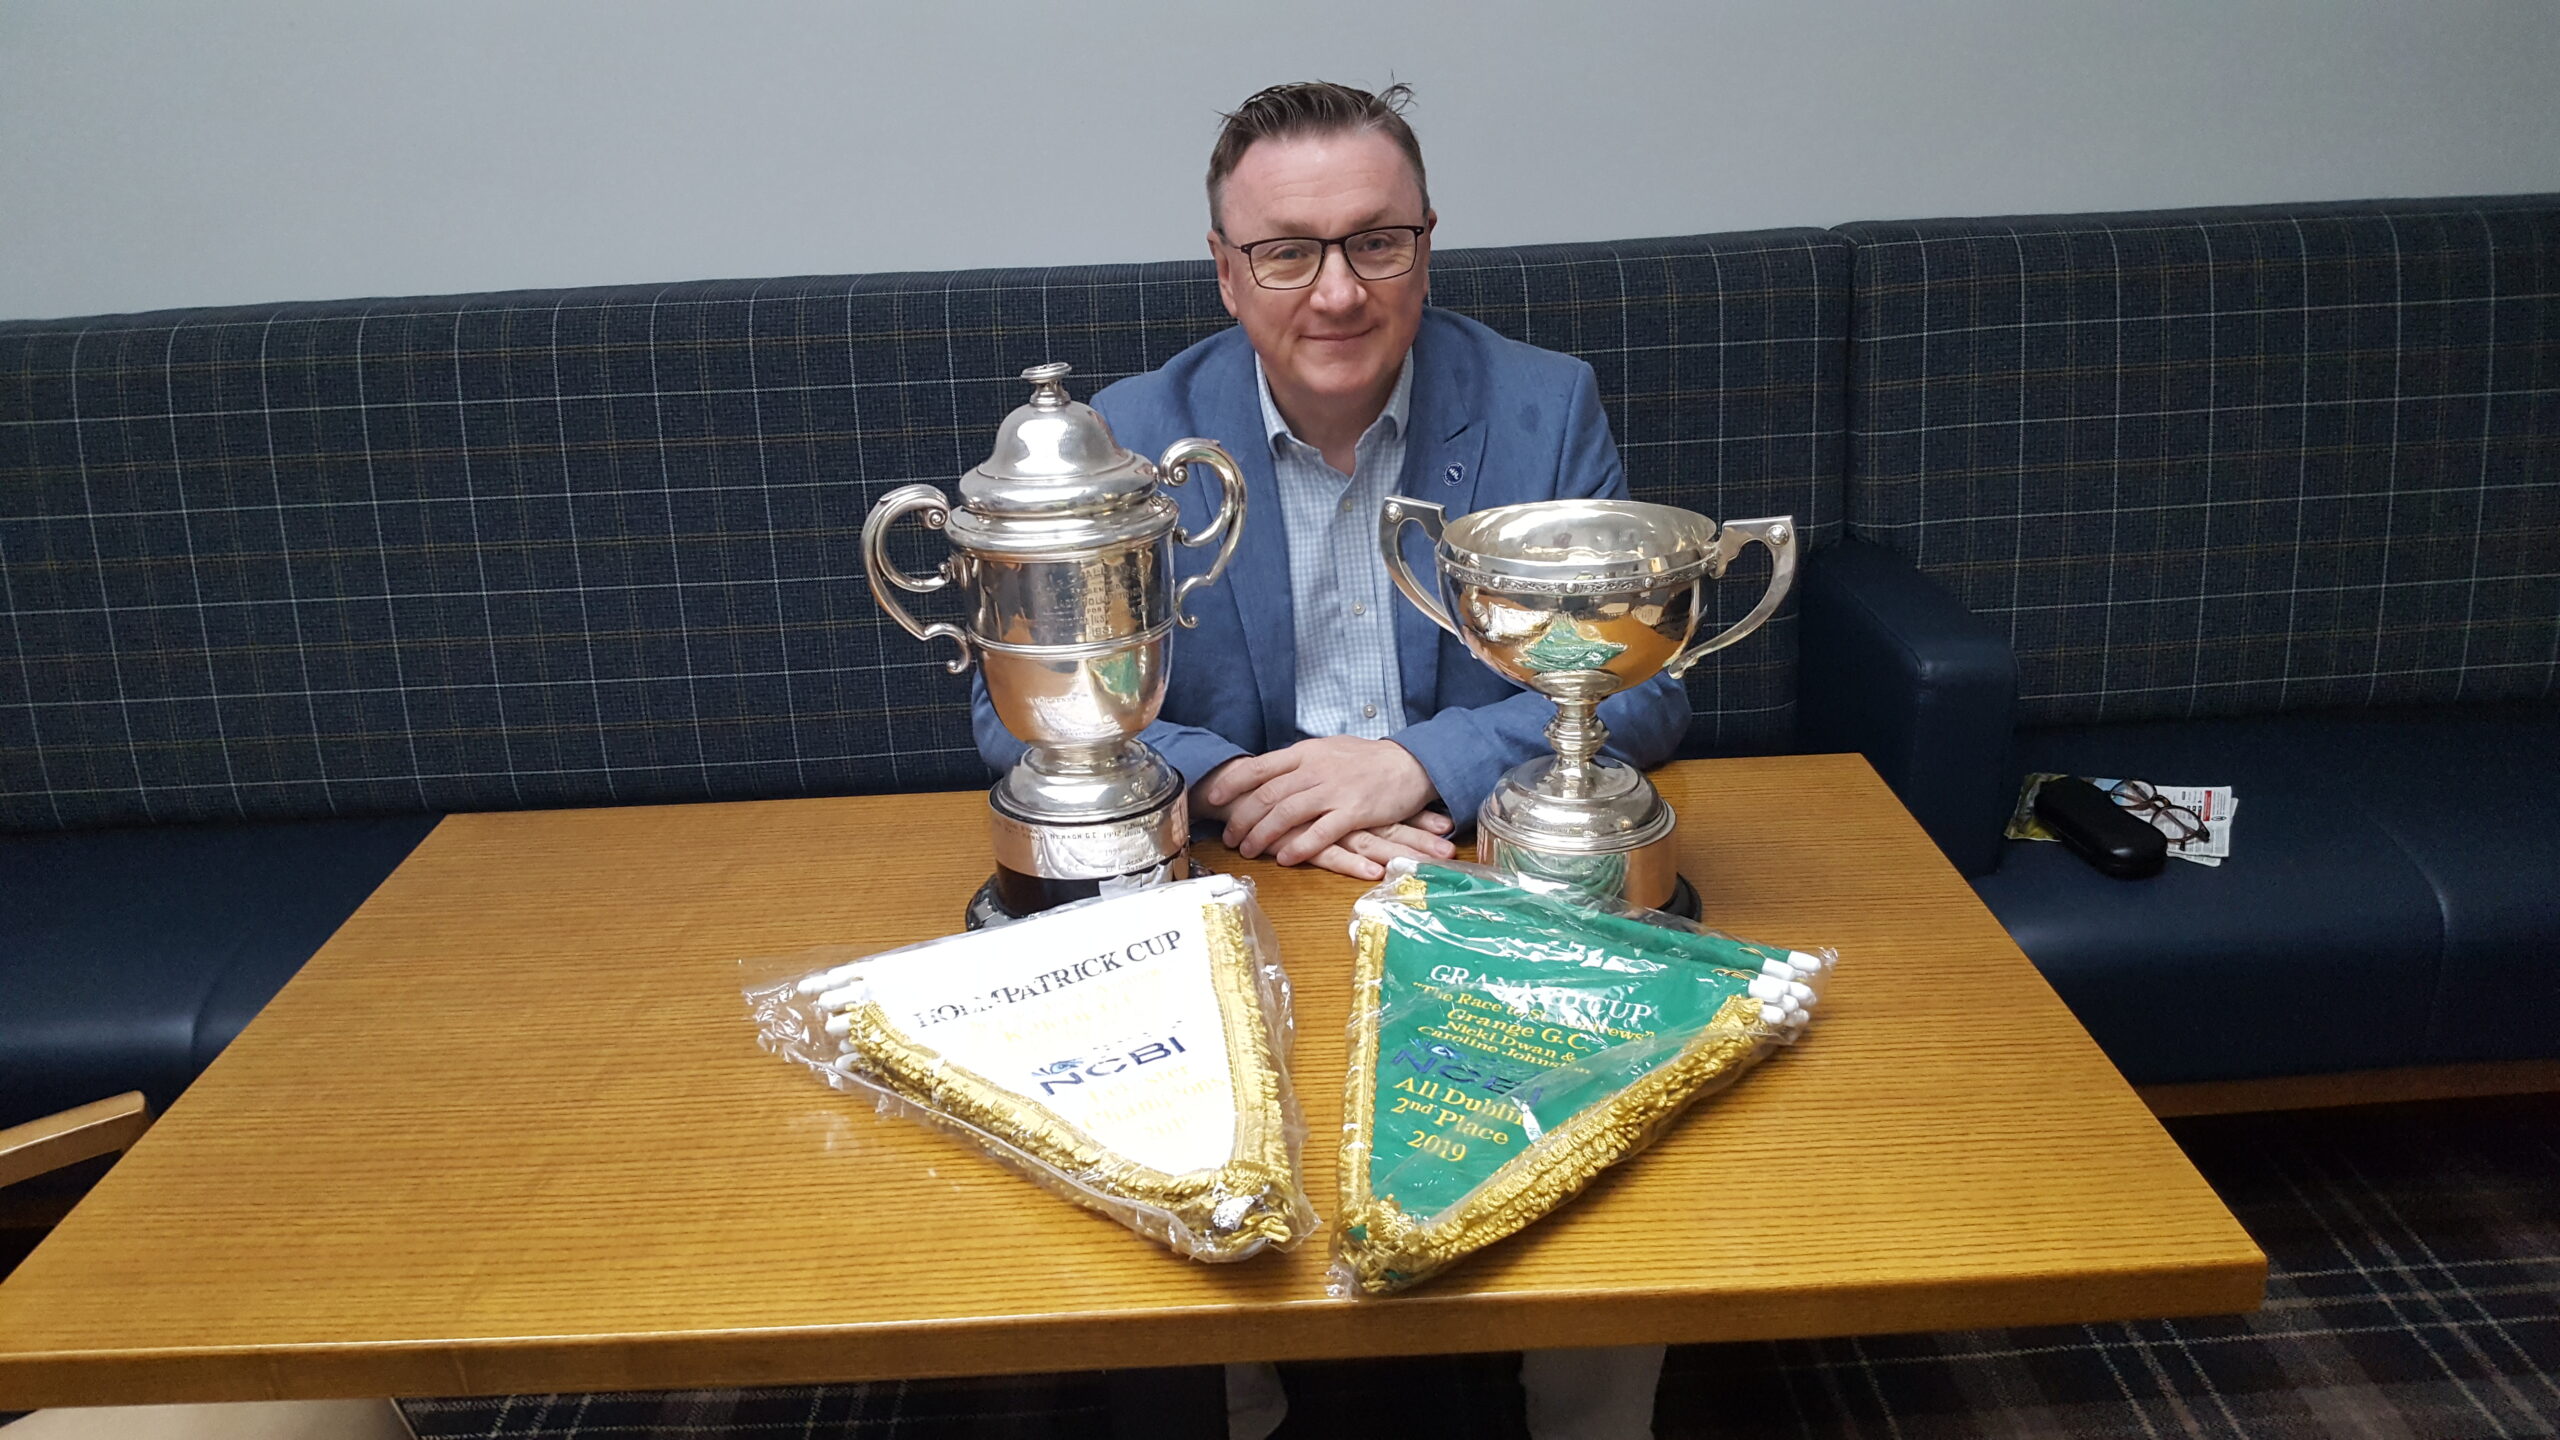 Ceo Chris White and the two Golf Cups